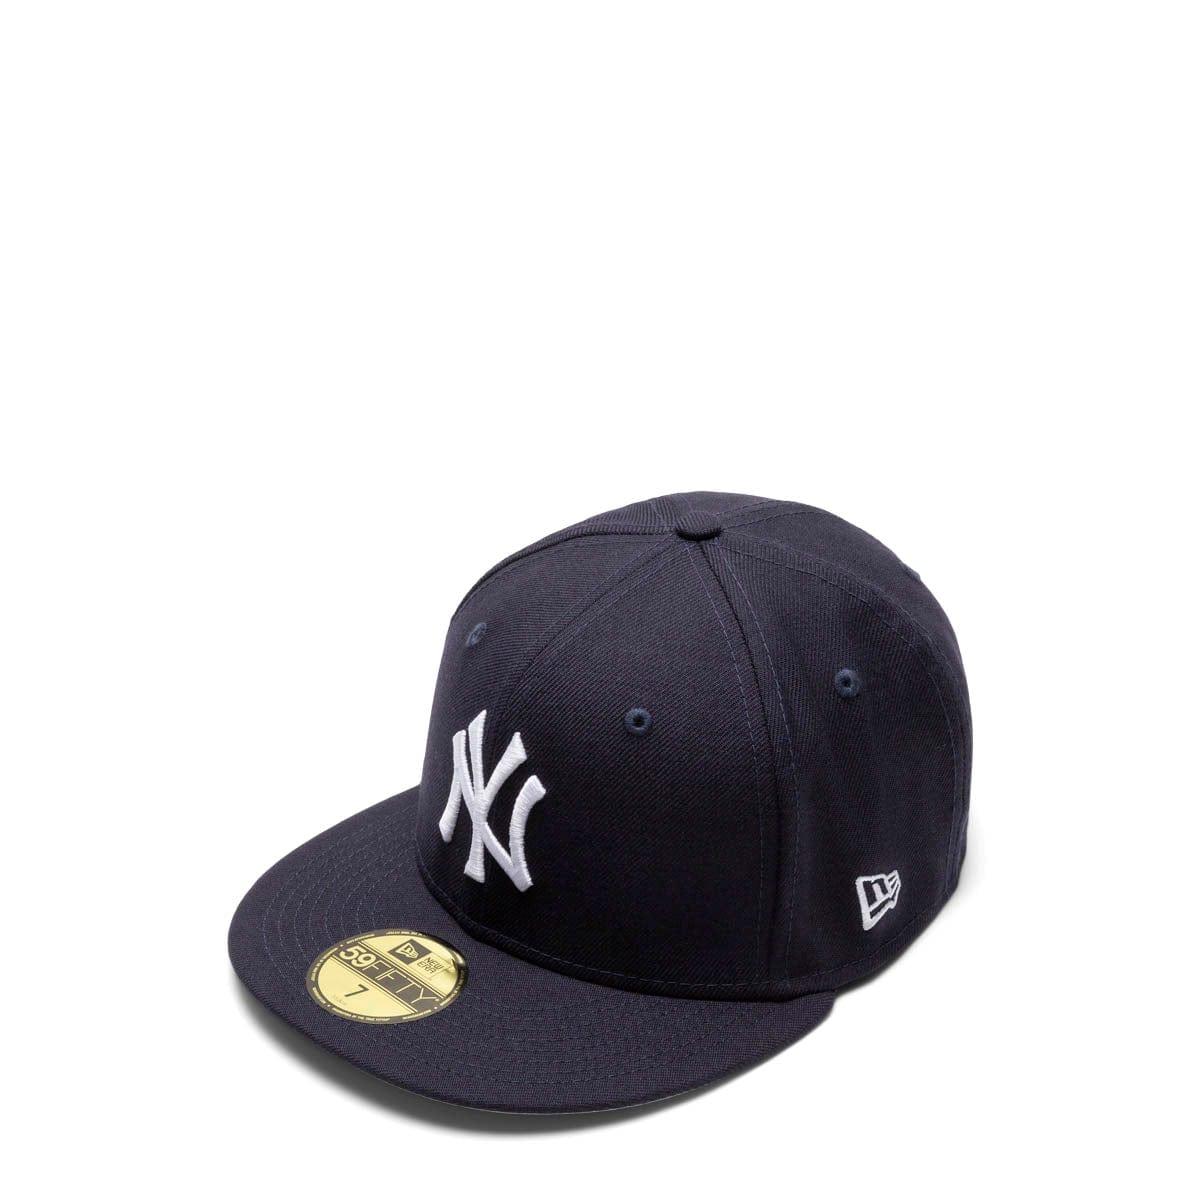 New Era 59FIFTY NEW YORK YANKEES (1998) LOGO HISTORY FITTED CAP NAVY